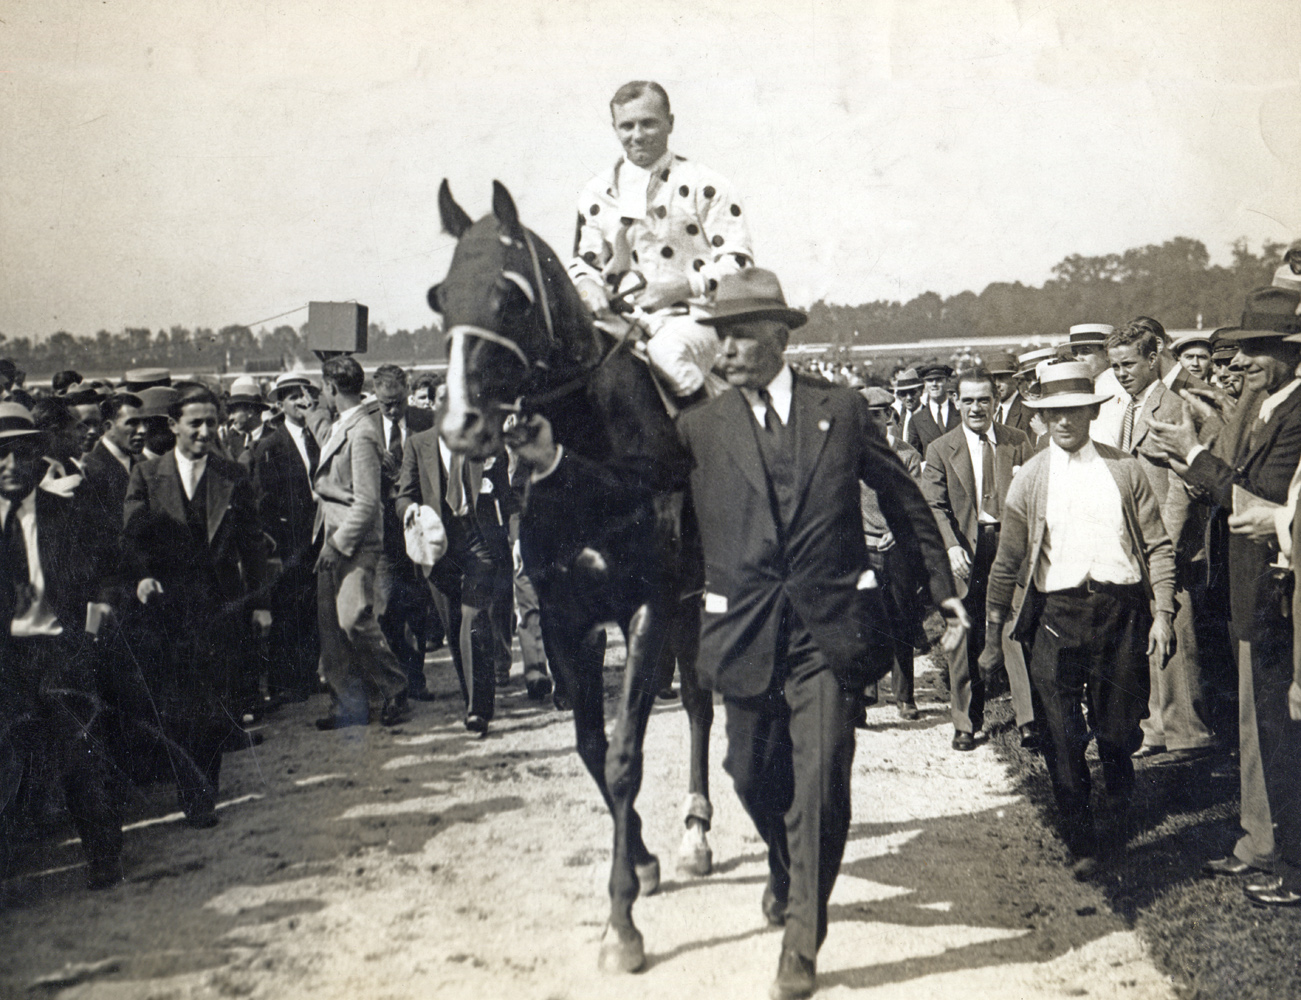 William Woodward, Sr. leads in Gallant Fox (Earl Sande up) after winning the 1930 Lawrence Realization at Belmont Park (Pictorial Press Photos/Museum Collection)